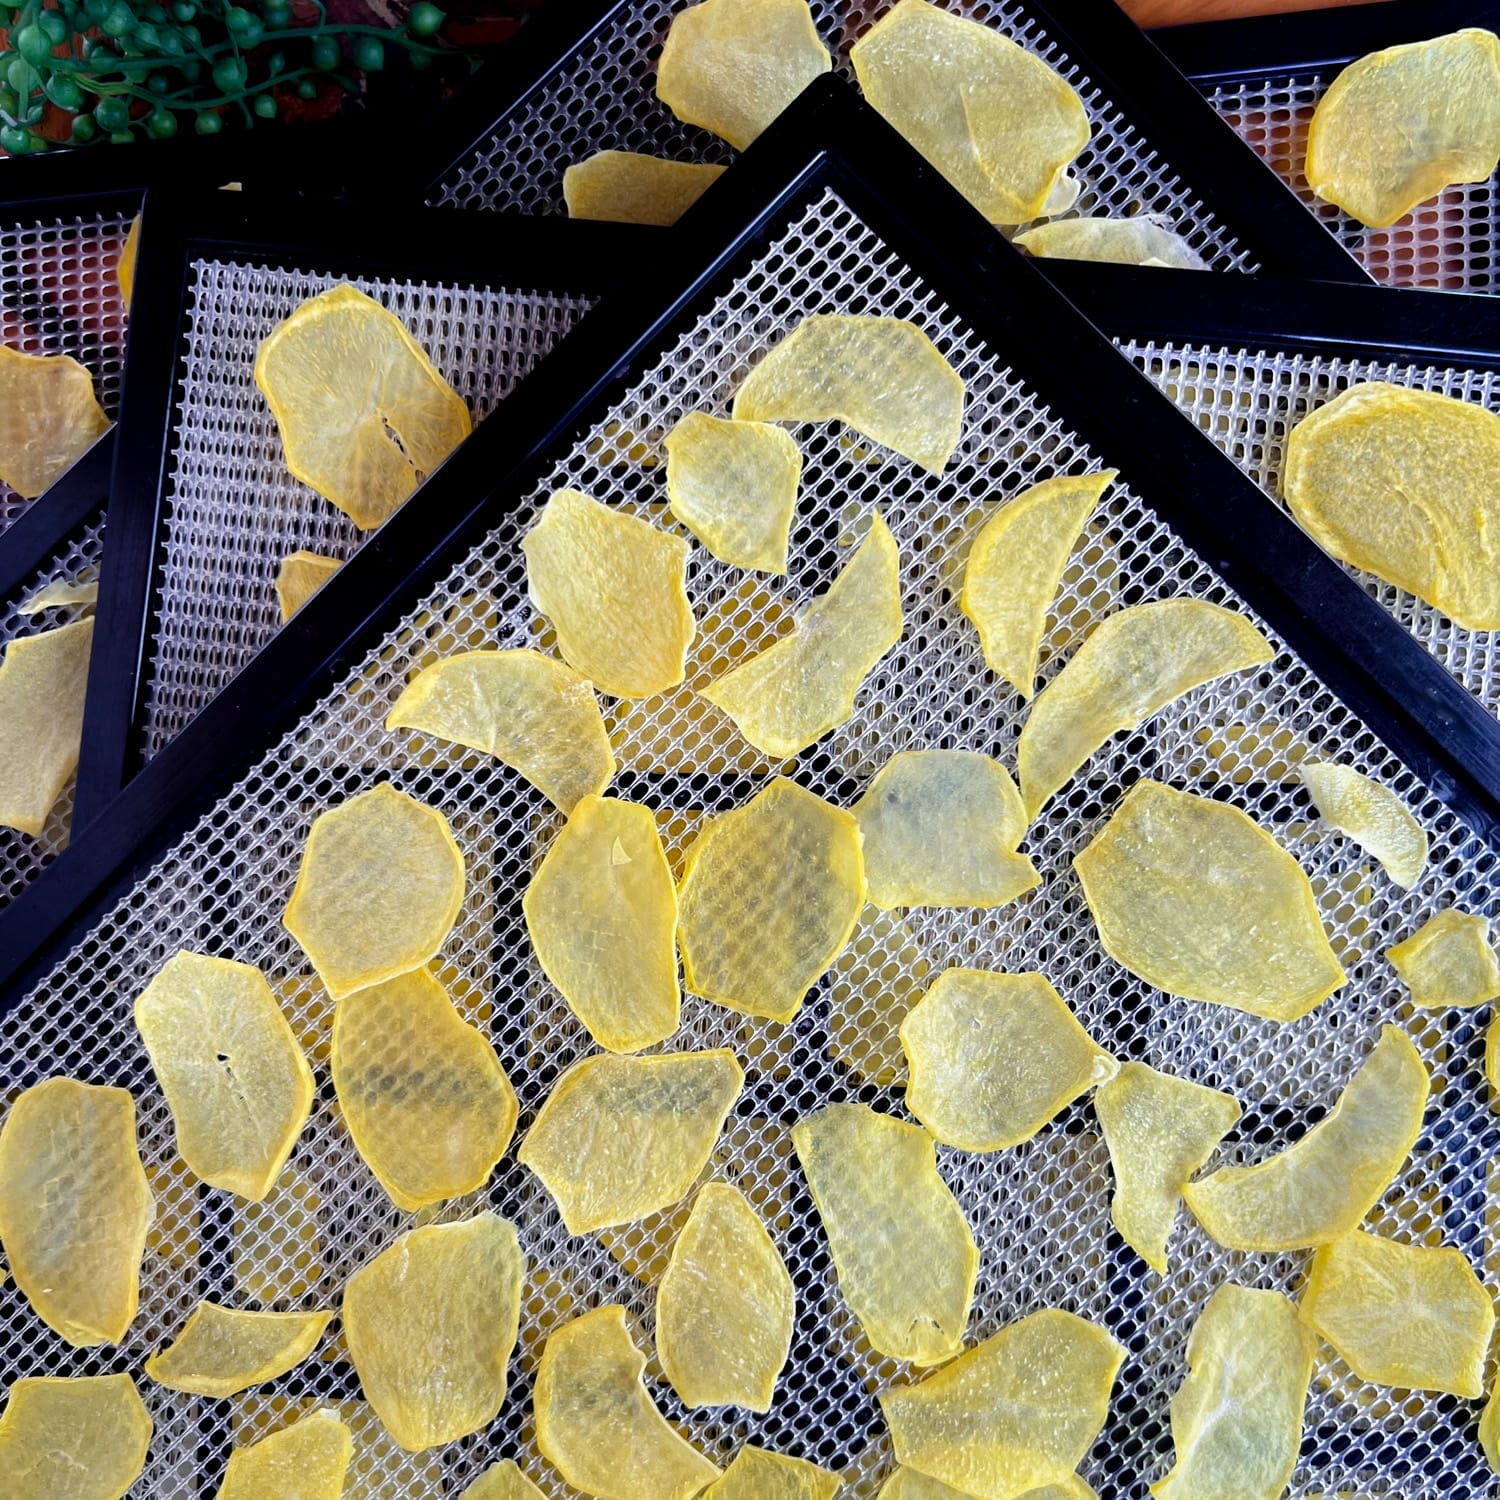 dehydrated potato slices on stack of mesh trays